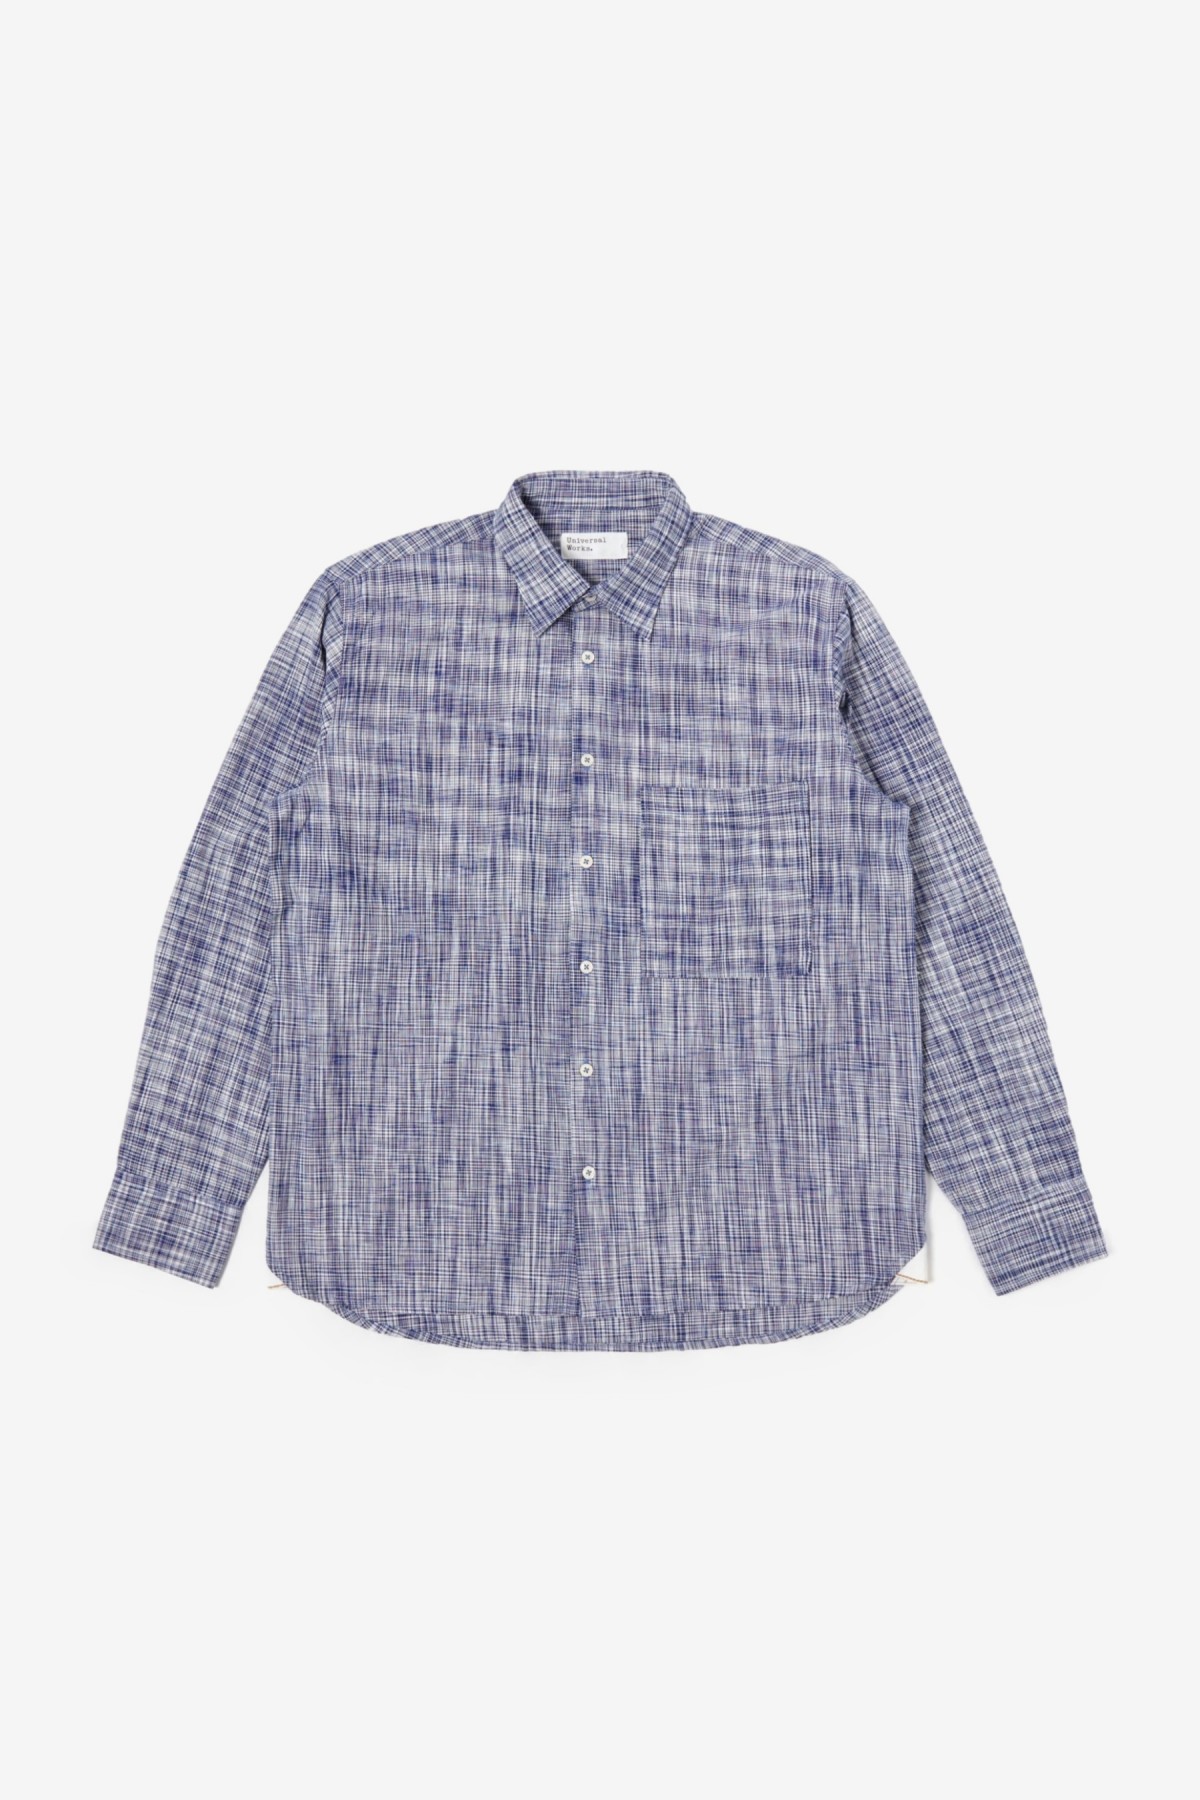 Universal Works Square Pocket Shirt in Navy